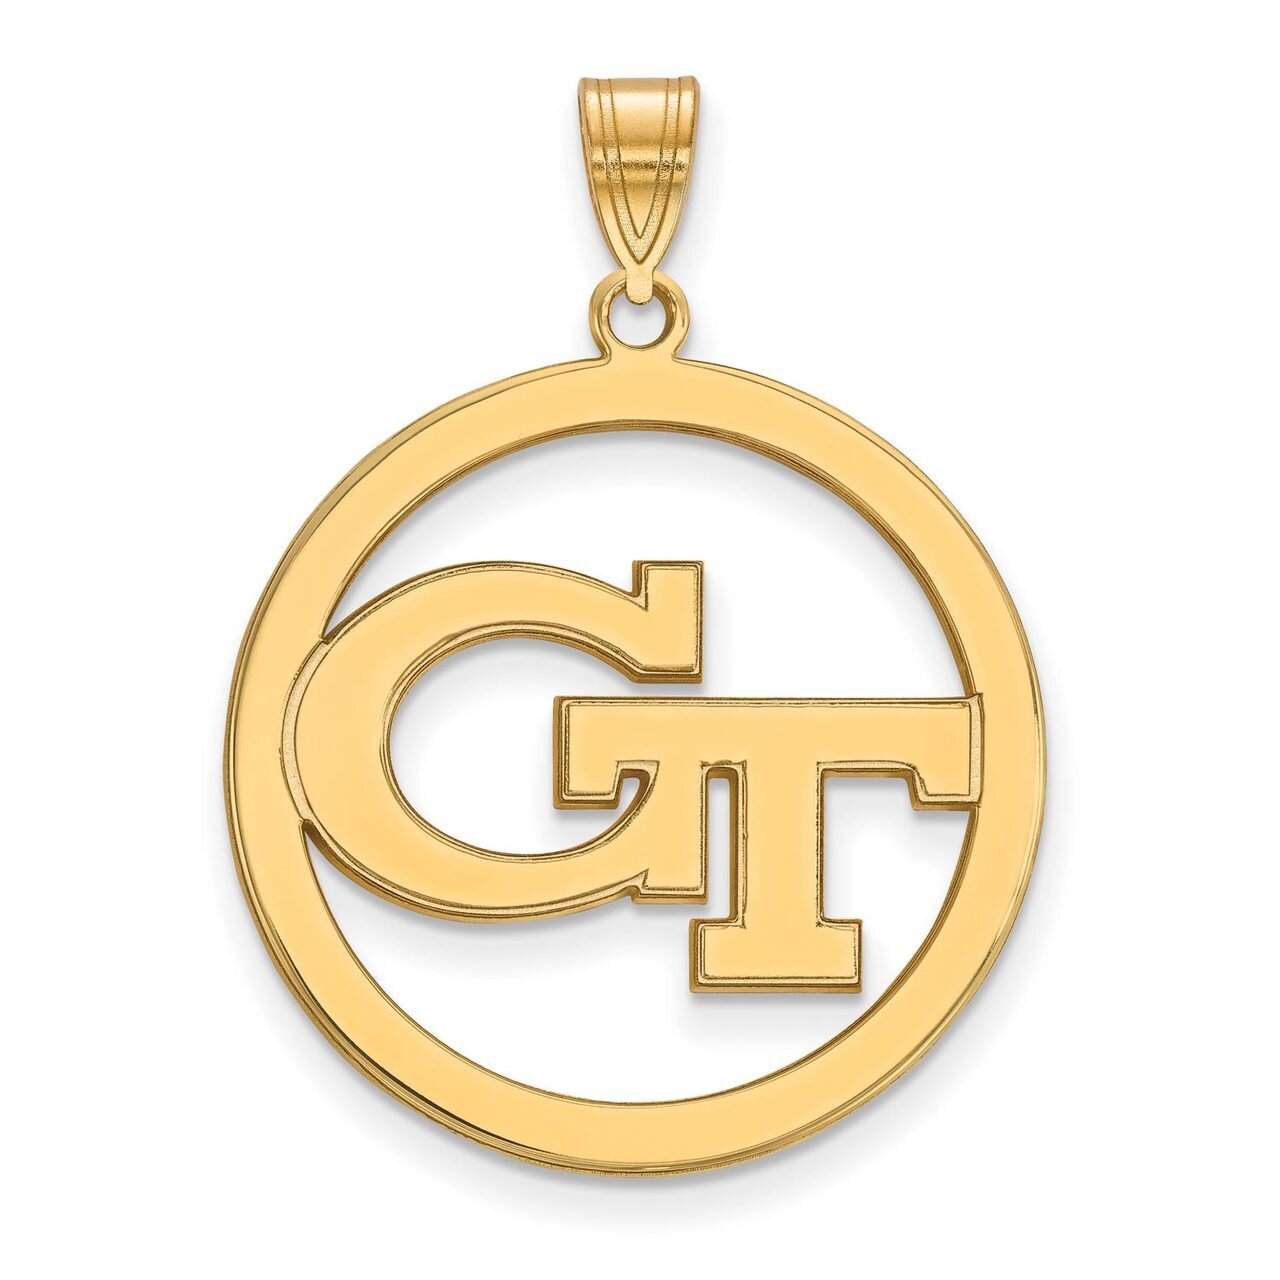 Georgia Institute of Technology L Pendant in Circle Gold-plated Silver GP028GT